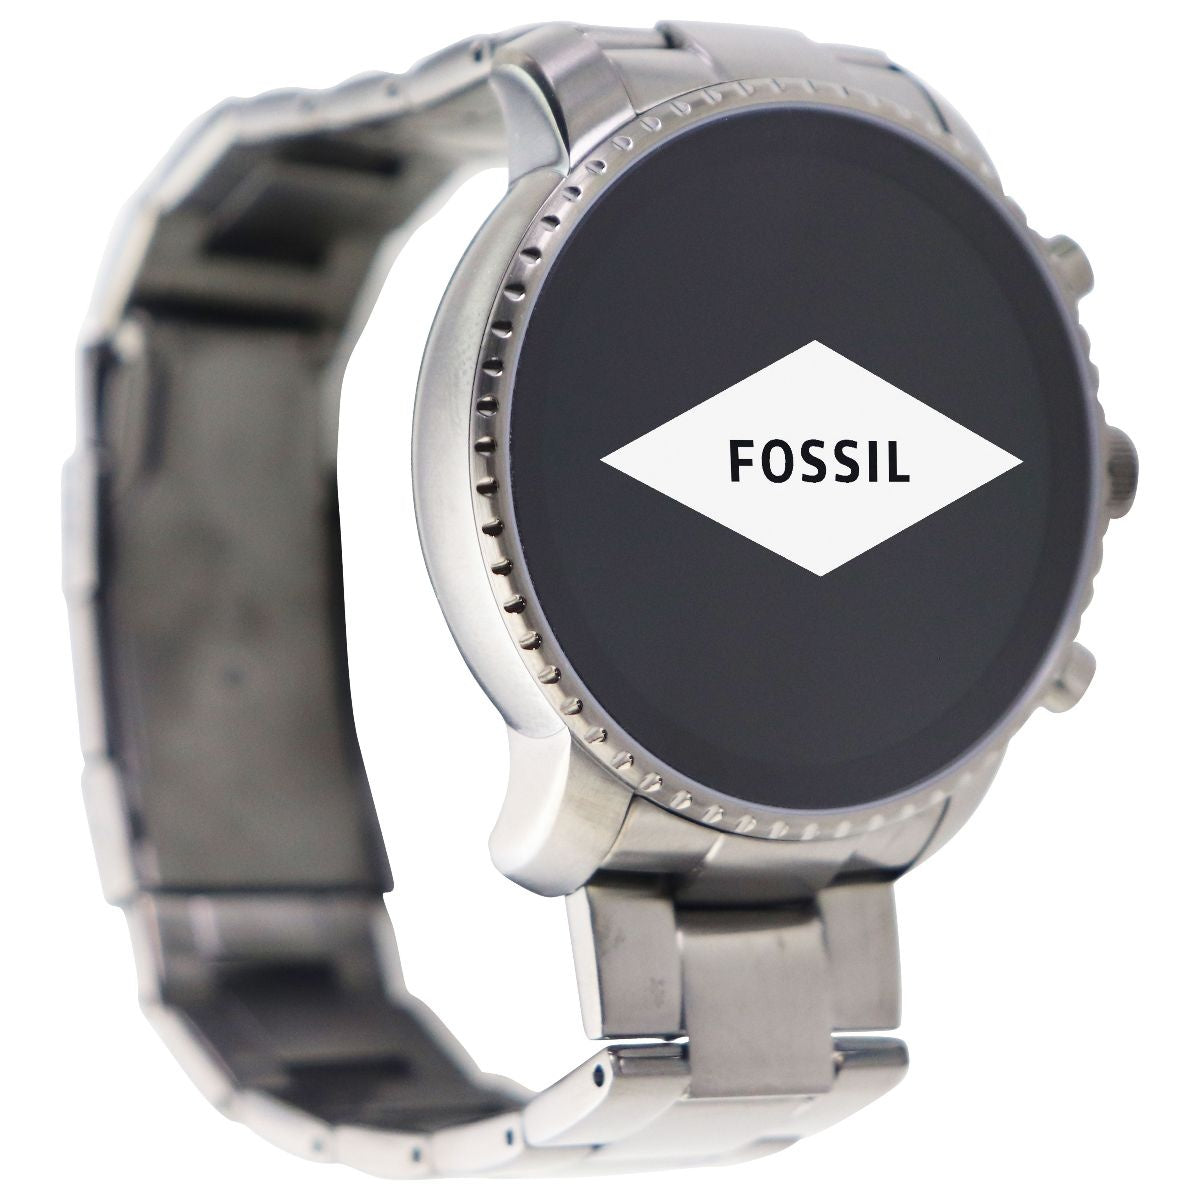 Fossil Gen 4 Explorist HR Smartwatch 45mm Stainless Steel - Smoke (FTW4012) Smart Watches Fossil    - Simple Cell Bulk Wholesale Pricing - USA Seller